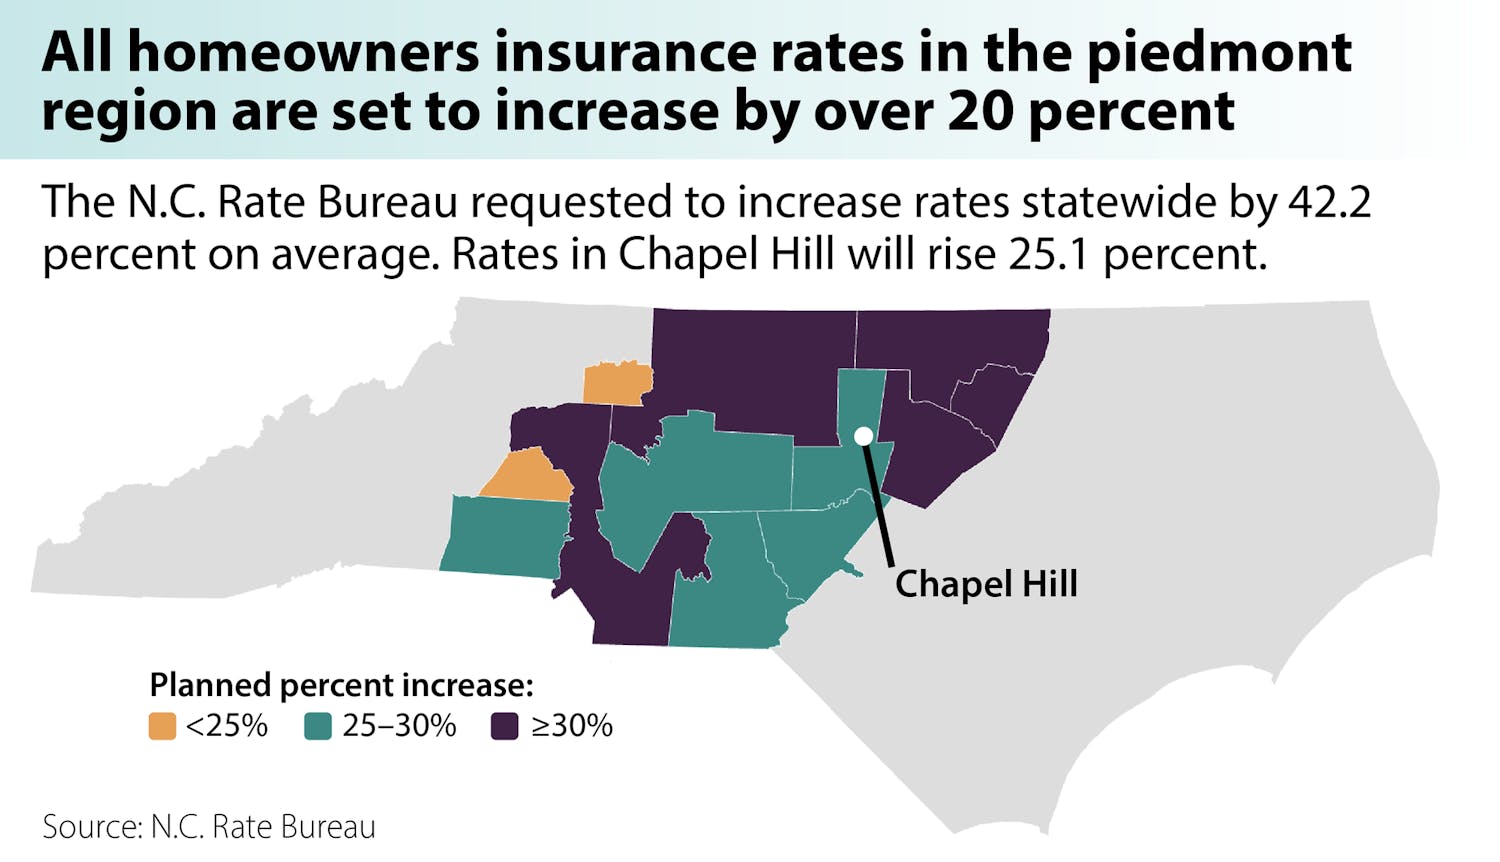 Visualization: All homeowners insurance rates in the piedmont region are set to increase by over 20 percent